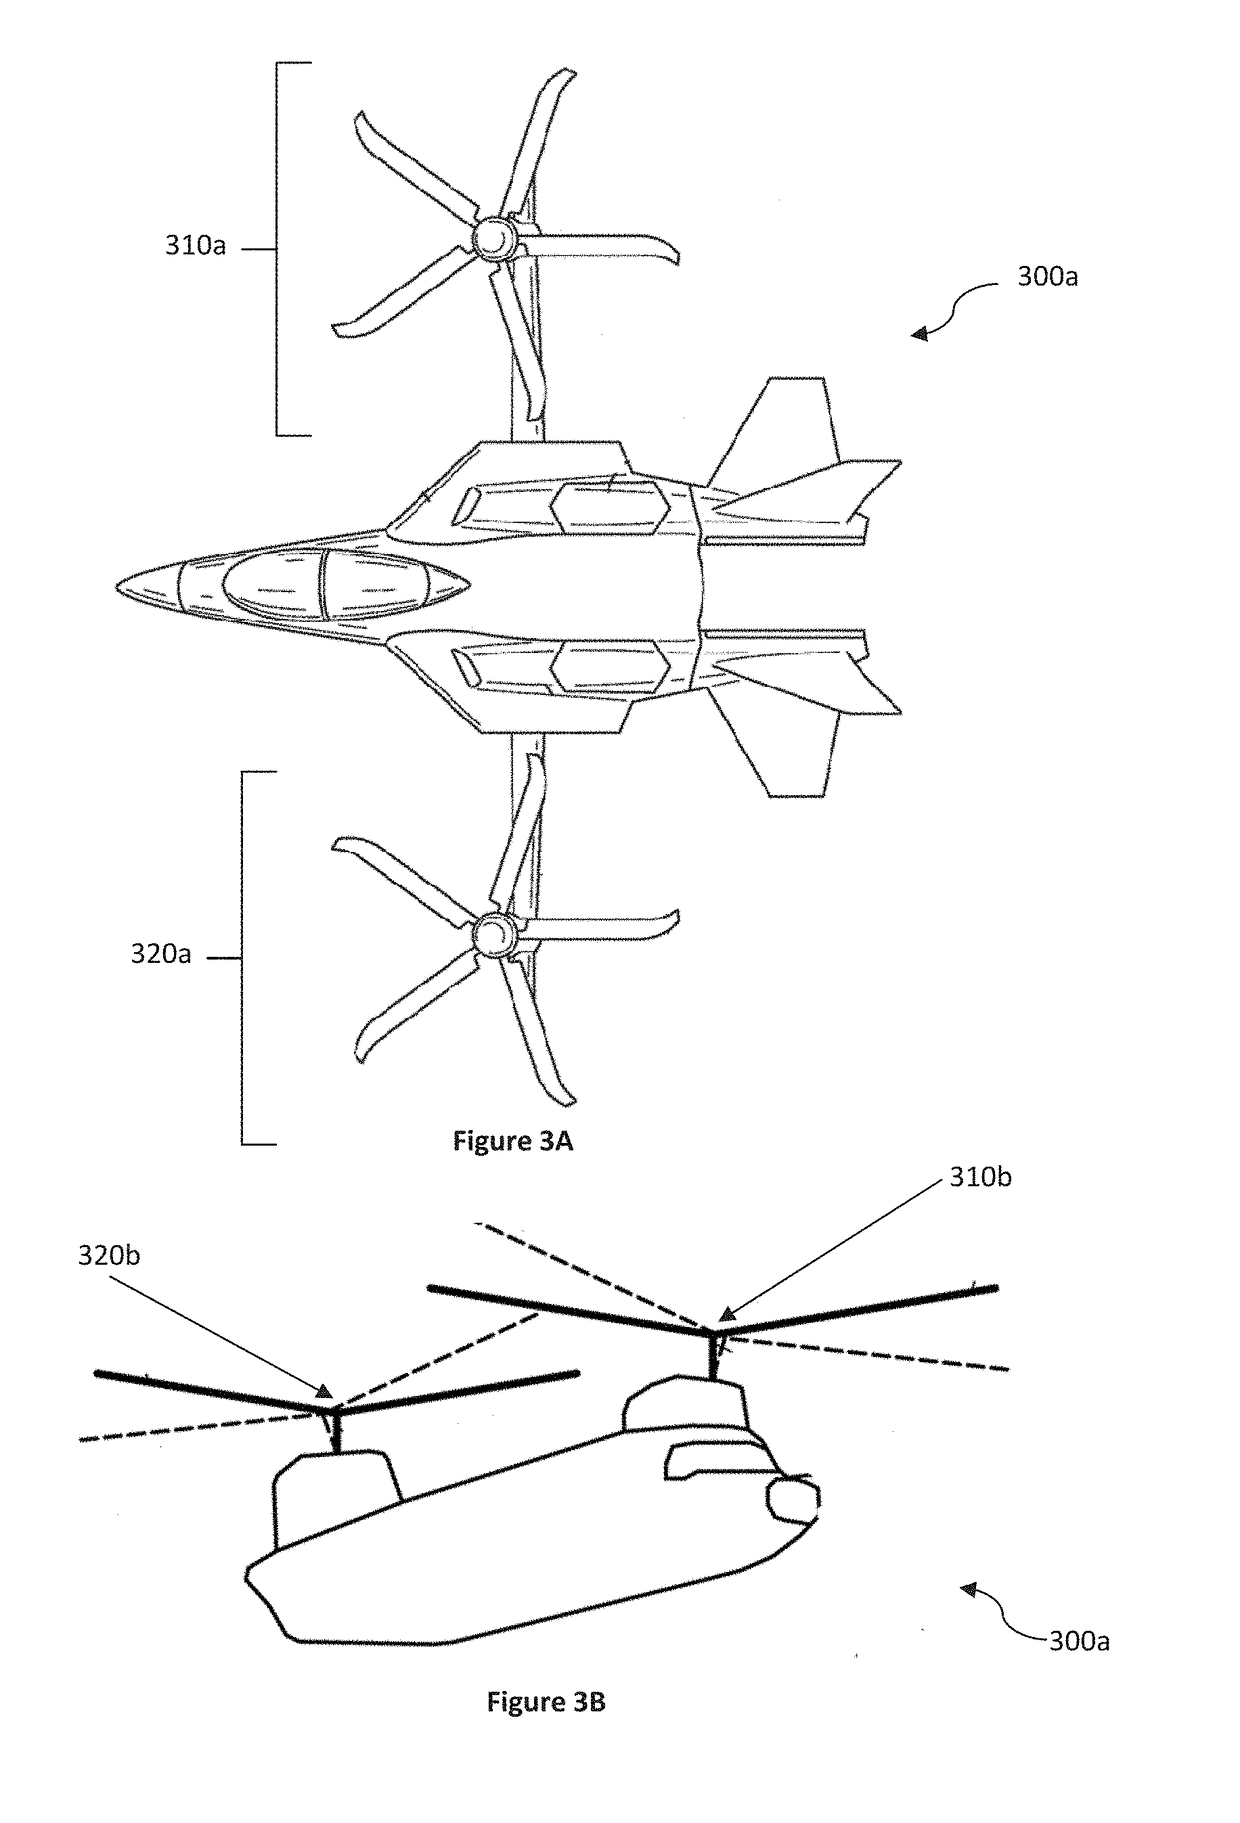 Use of individual blade control on a propeller or rotor in axial flight for the purpose of aerodynamic braking and power response modulation